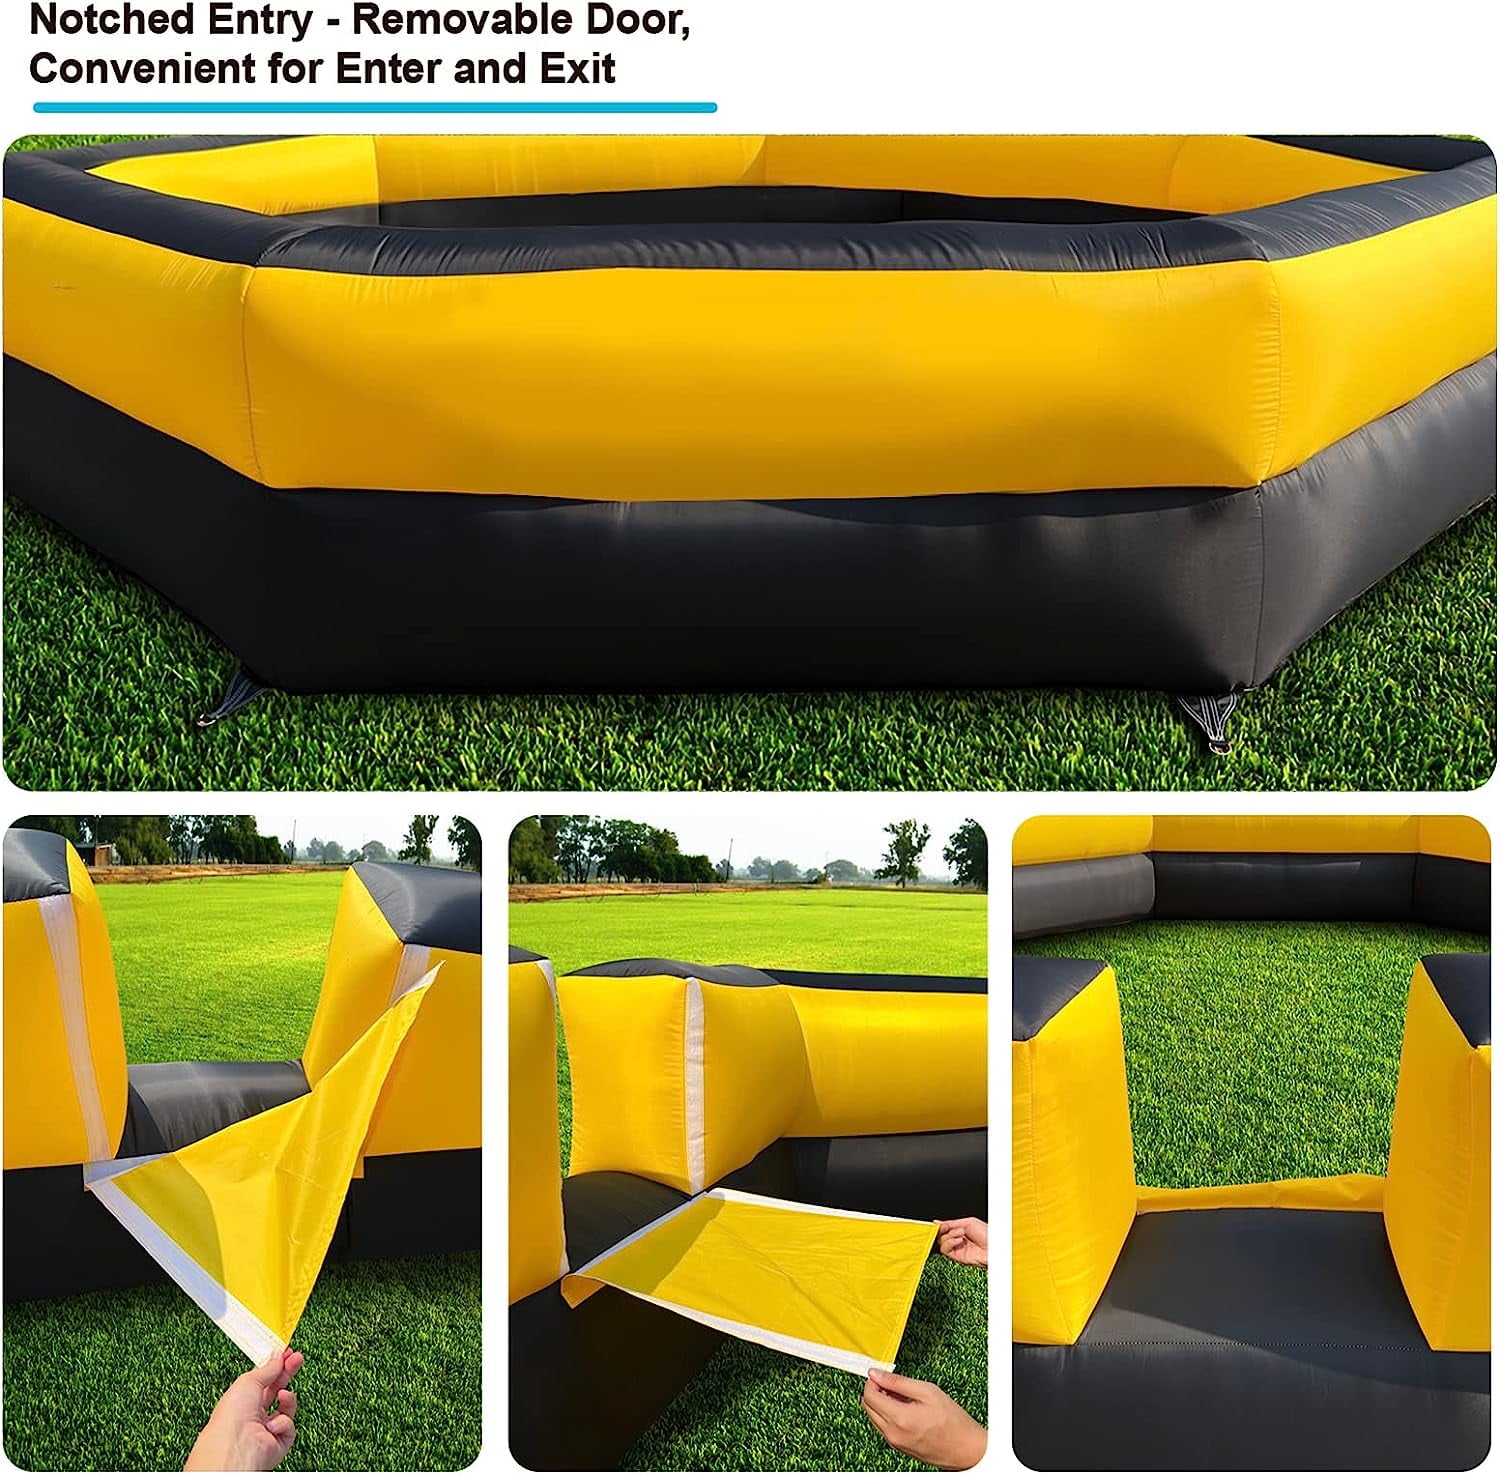 OZIS Gaga Ball Pit Inflatable 15FT with Built-in Blower, Portable Gaga Pit for Indoor Outdoor School Family Activities Easy to Setup